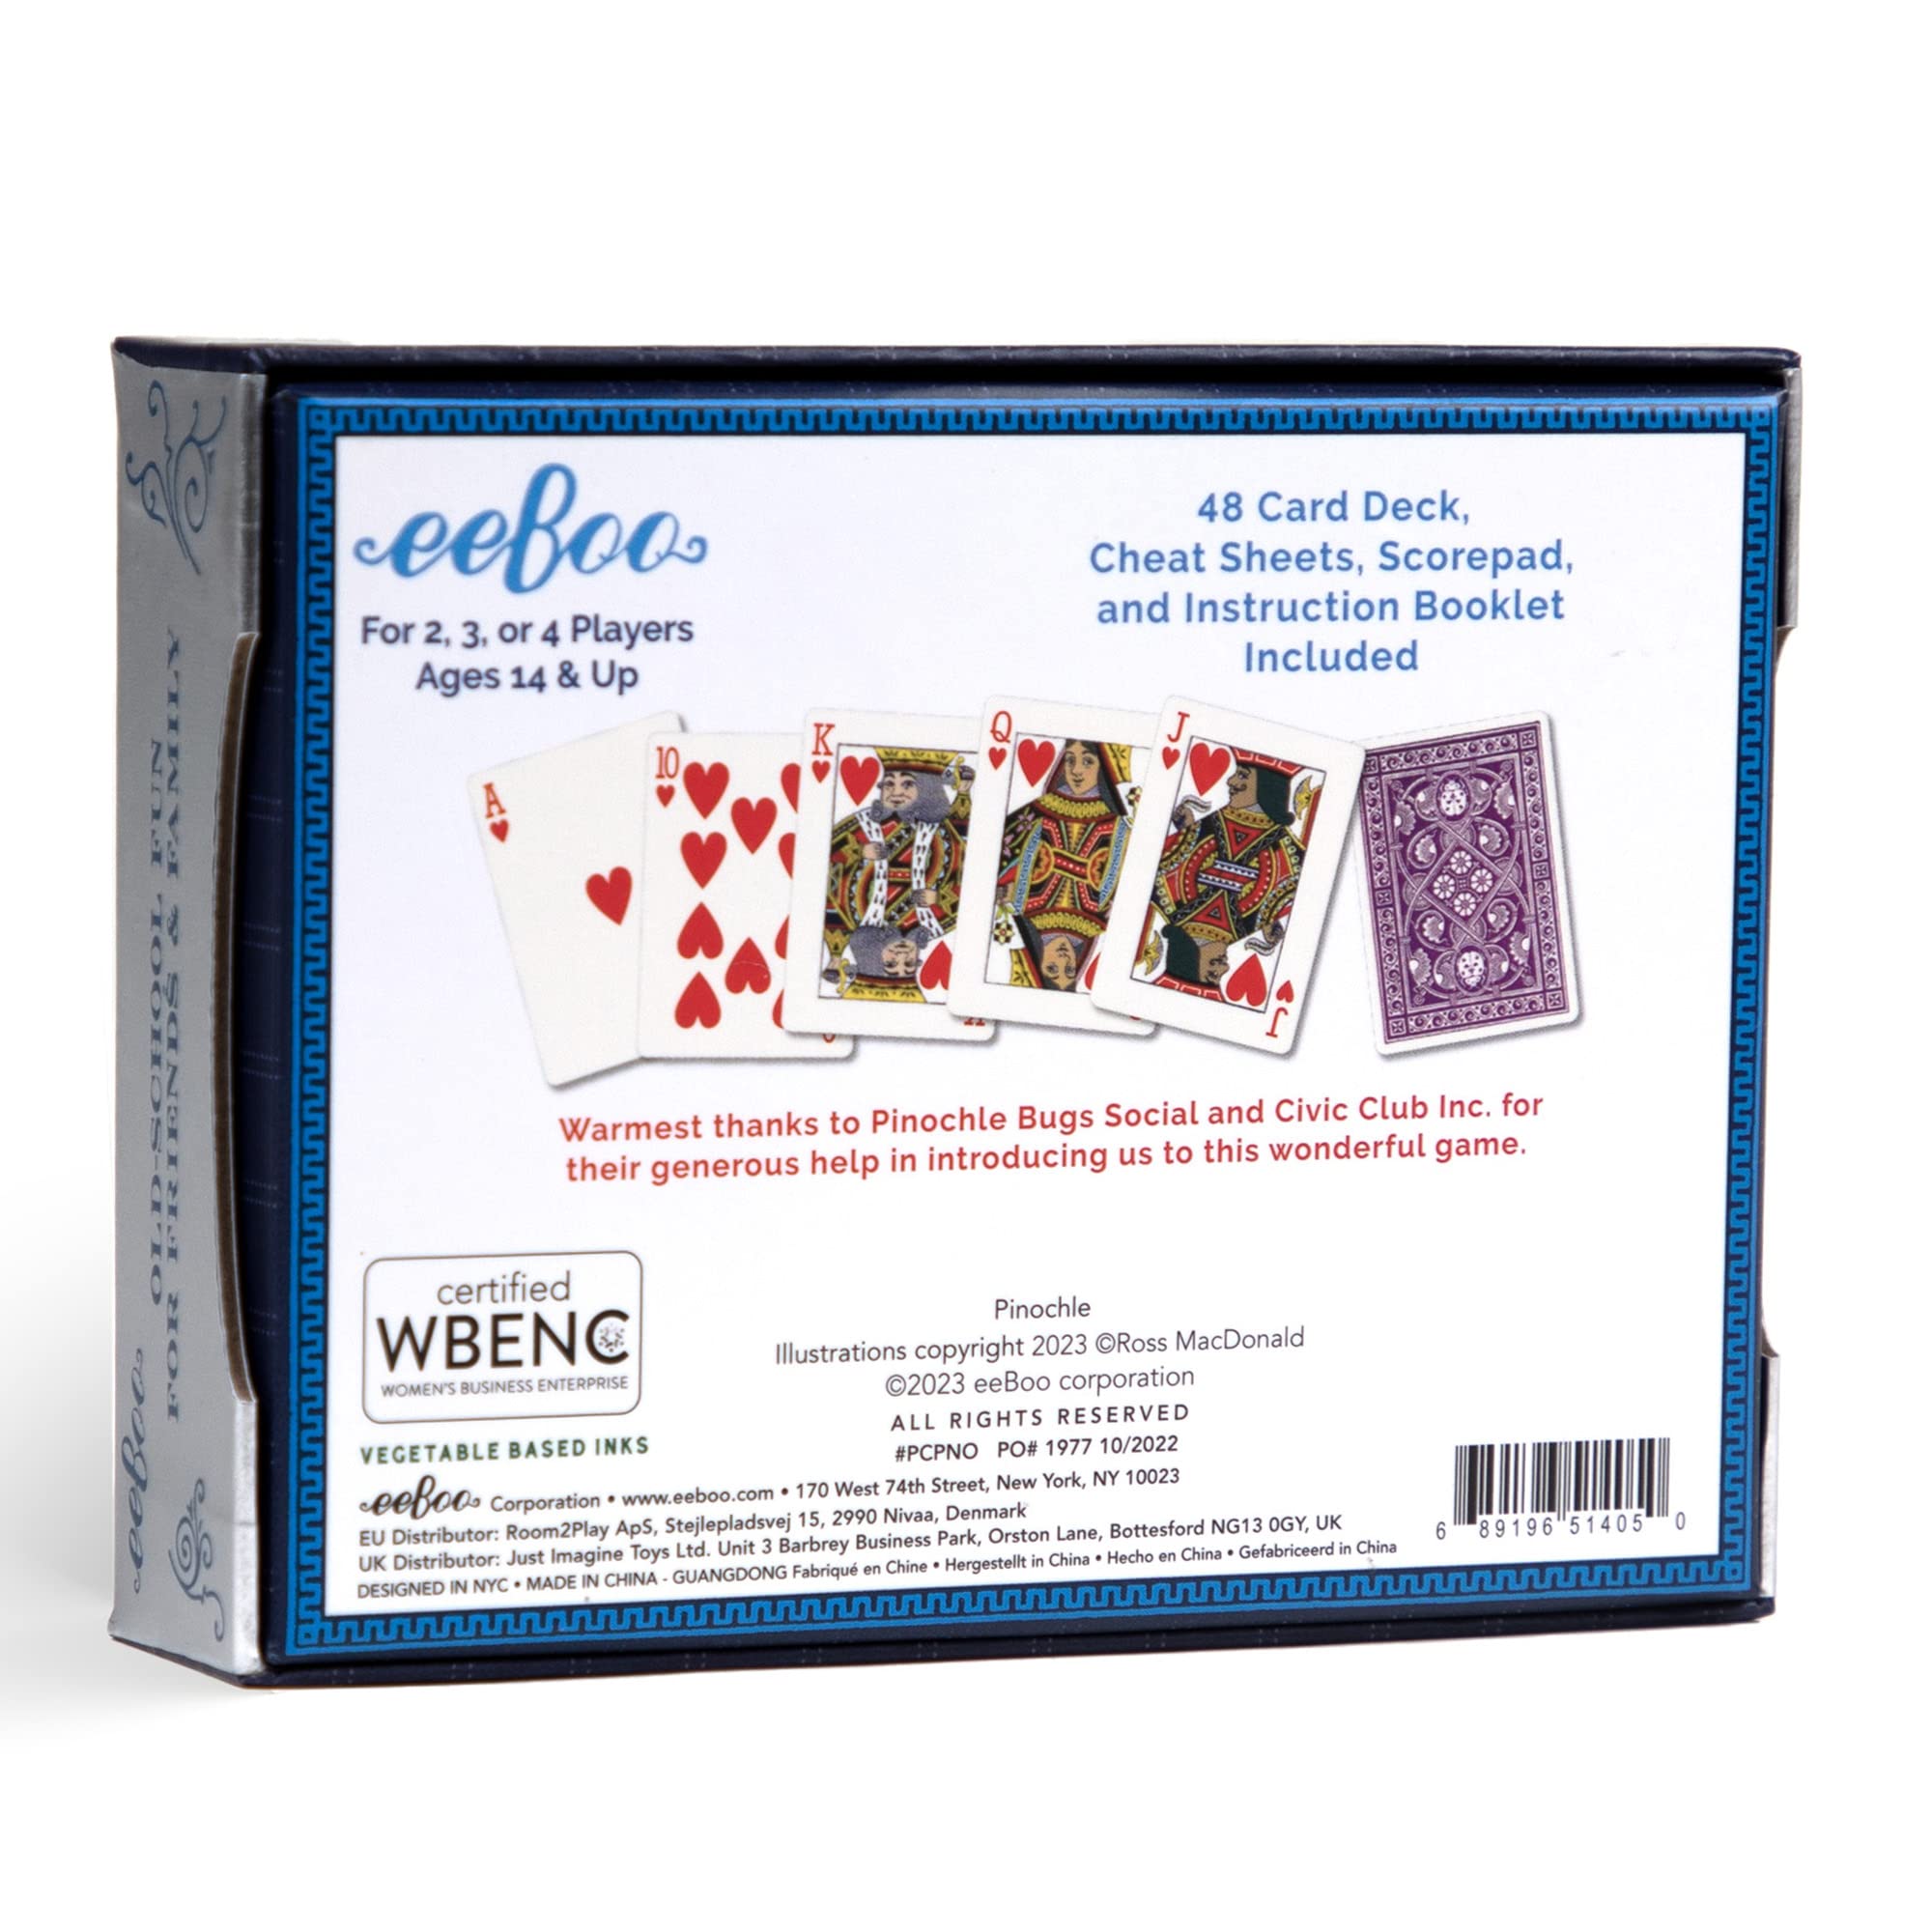 eeBoo: Piece and Love Pinochle Playing Card Set, an Artistic Version of This Traditional Card Game, Contains 48 Cards, 4 Cheat Cards and Scorepad, for Ages 14 and up